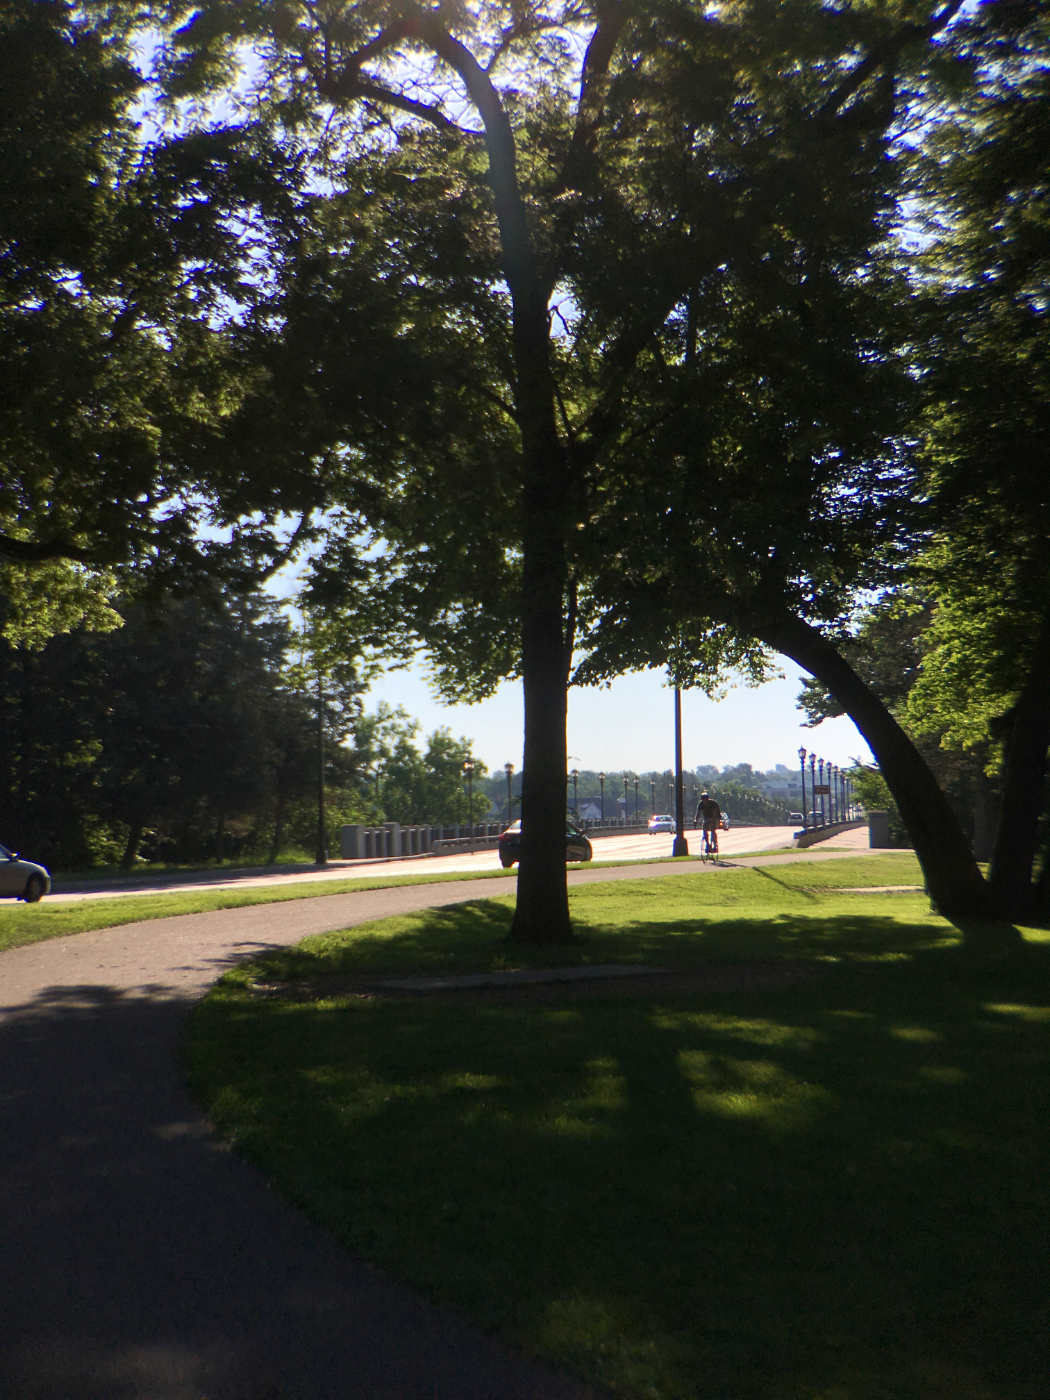 from beneath shade of trees, in the distance is a bicyclist and cars approaching on a roadway